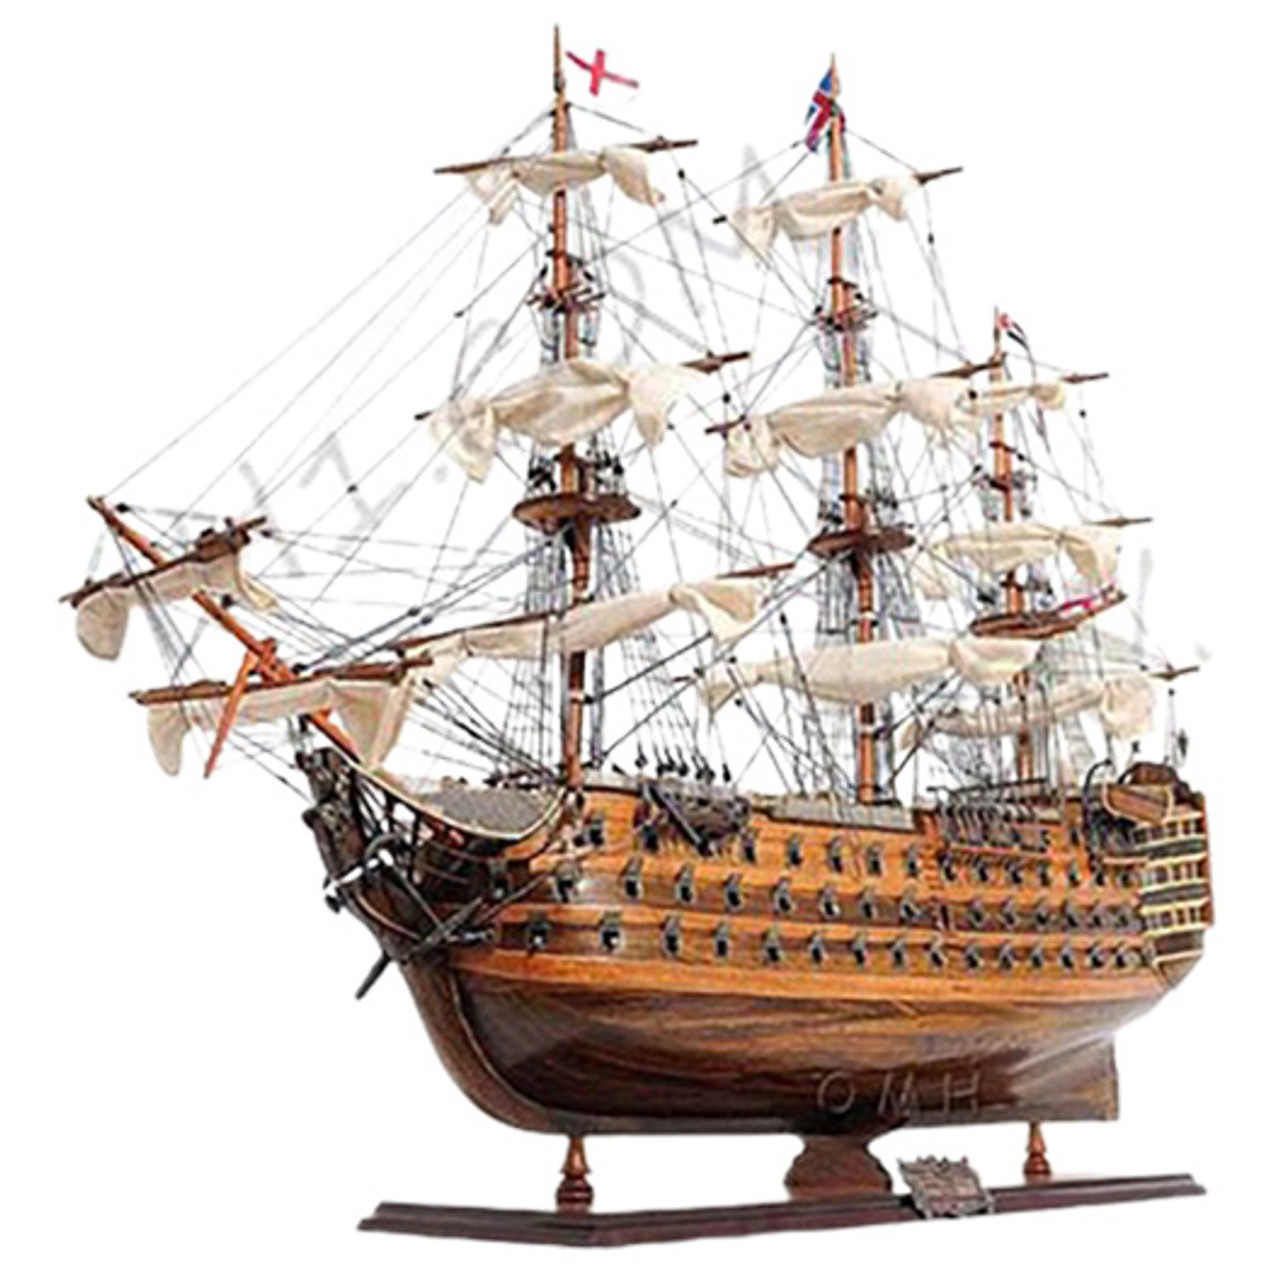 HMS Victory 37" Fully Assembled